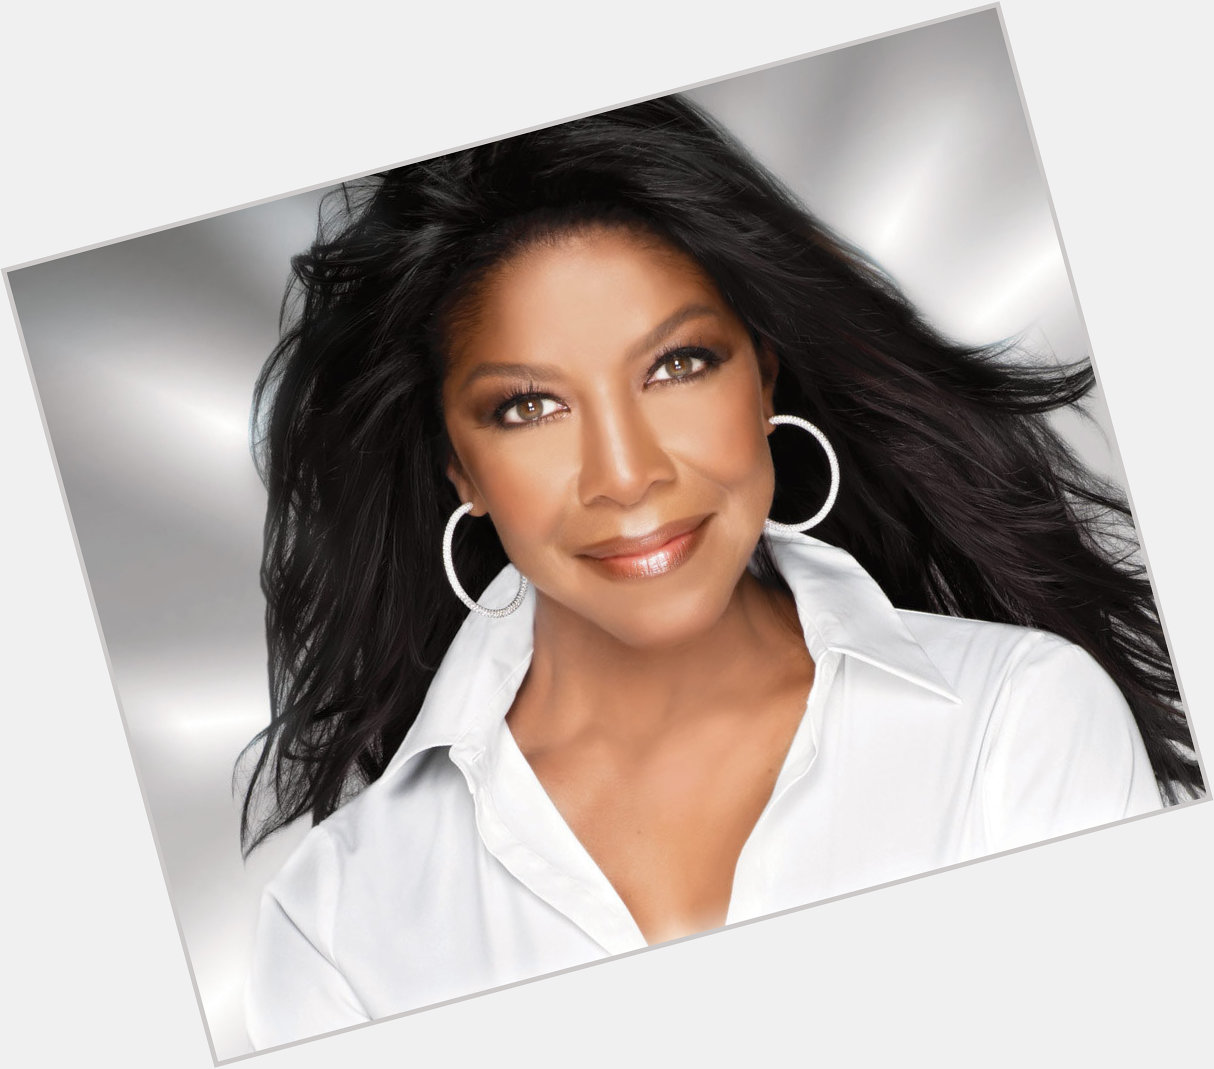 Happy Birthday to the unforgettable Natalie Cole! She performed at Tri-C JazzFest in 2014. 